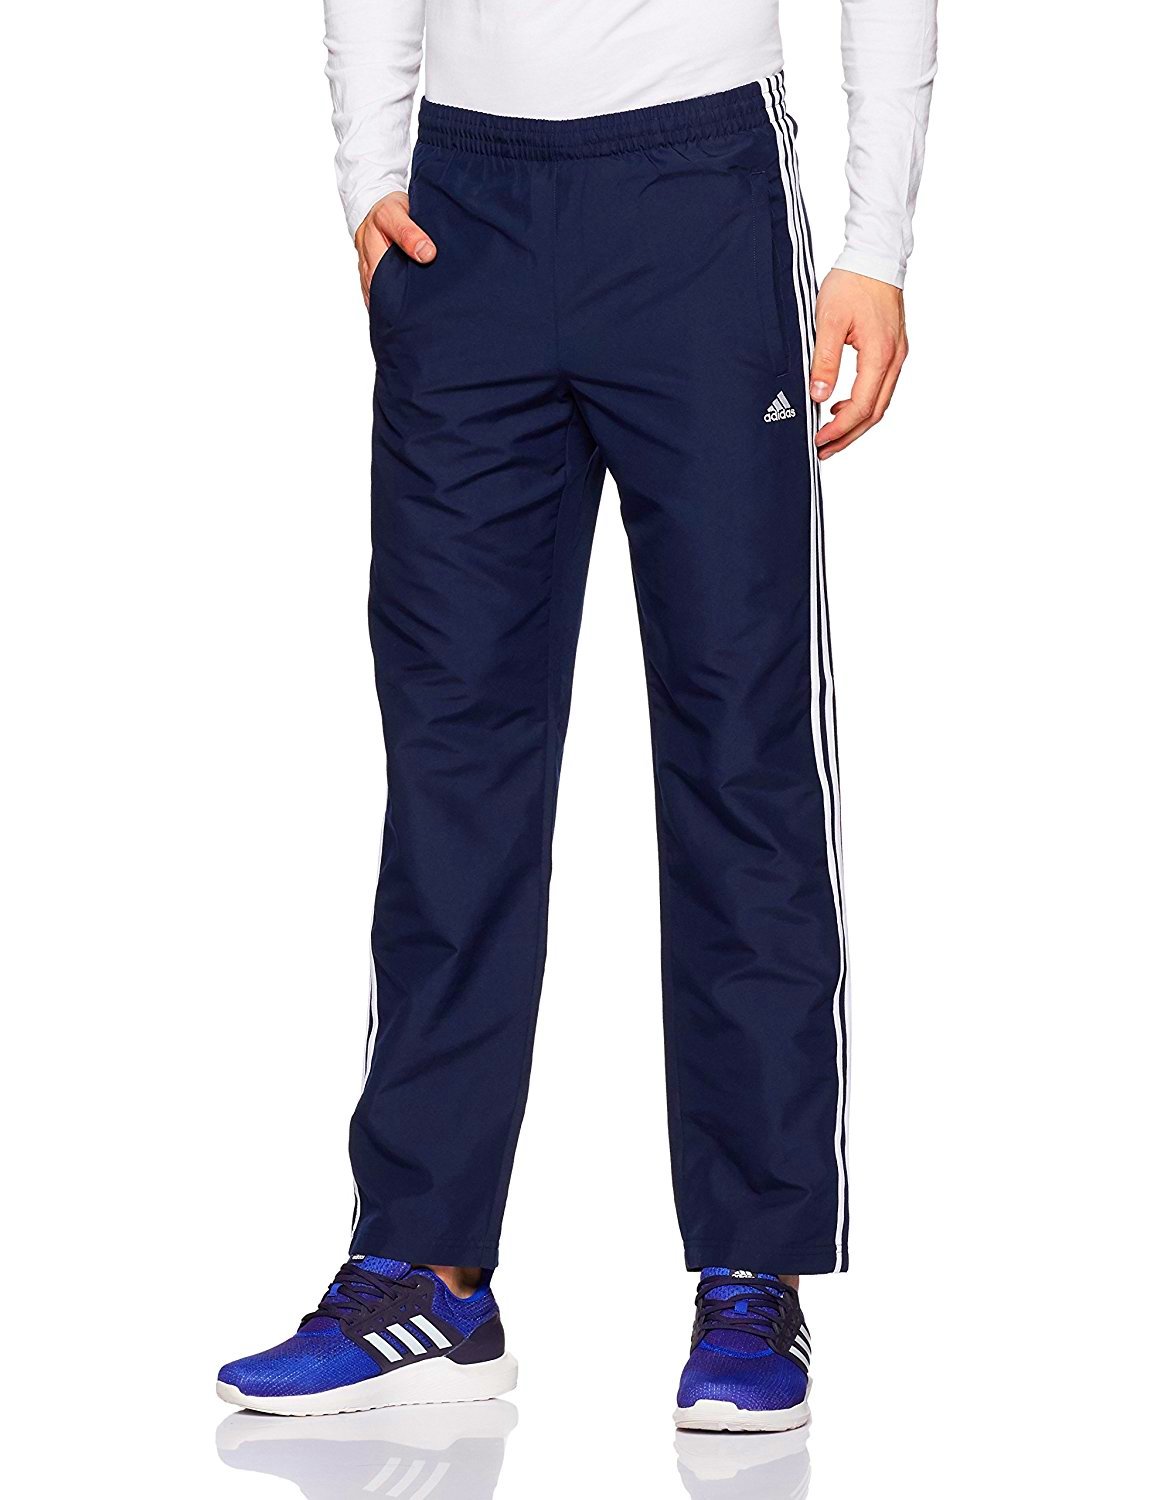 Buy Adidas Navy Polyester Tracksuit Online @ ₹1999 from ShopClues